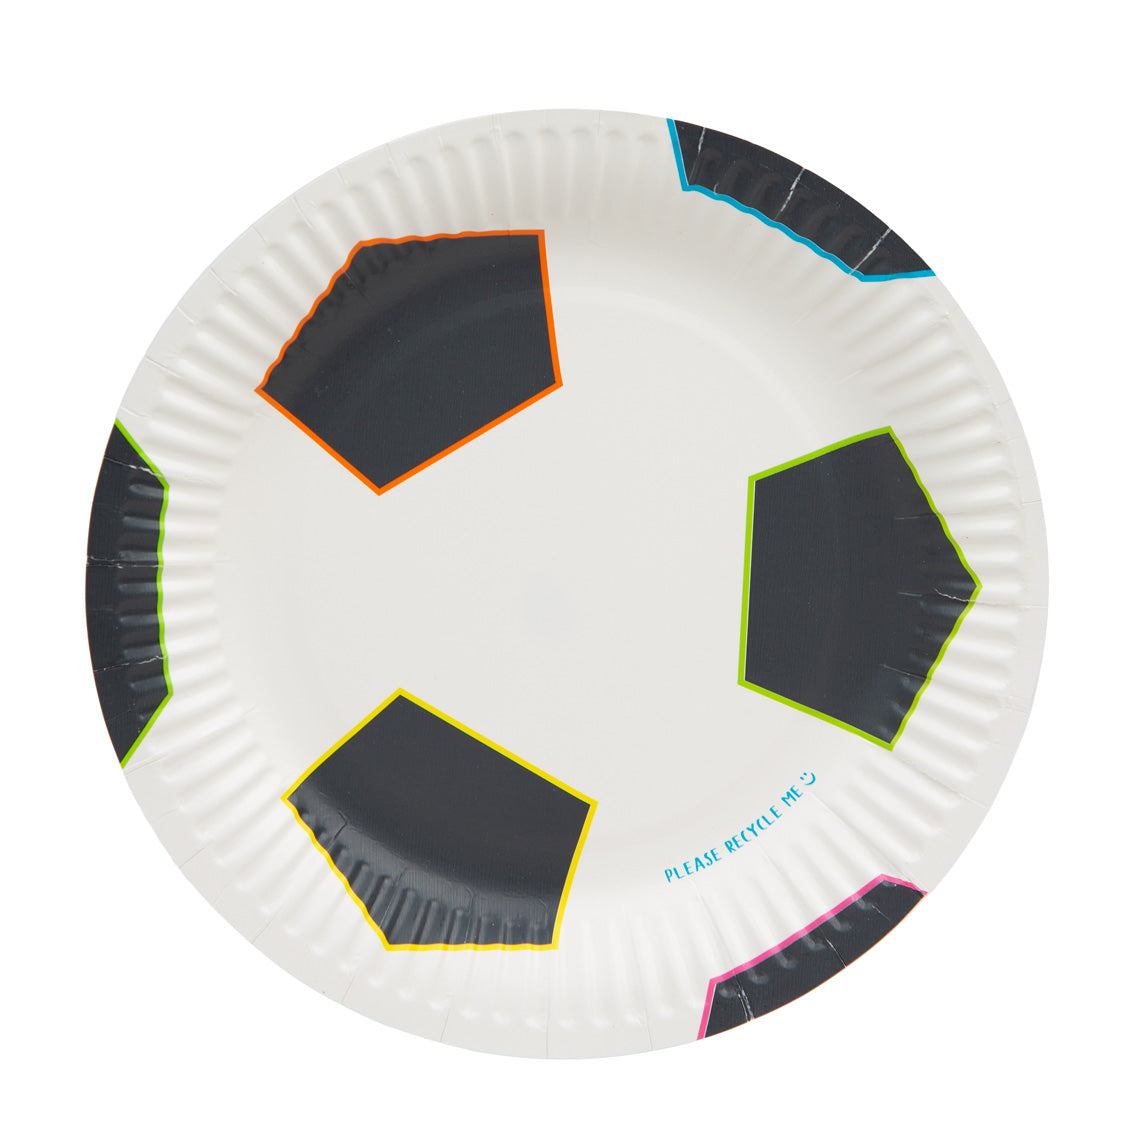 Recyclable Football Paper Plates - 12 Pack